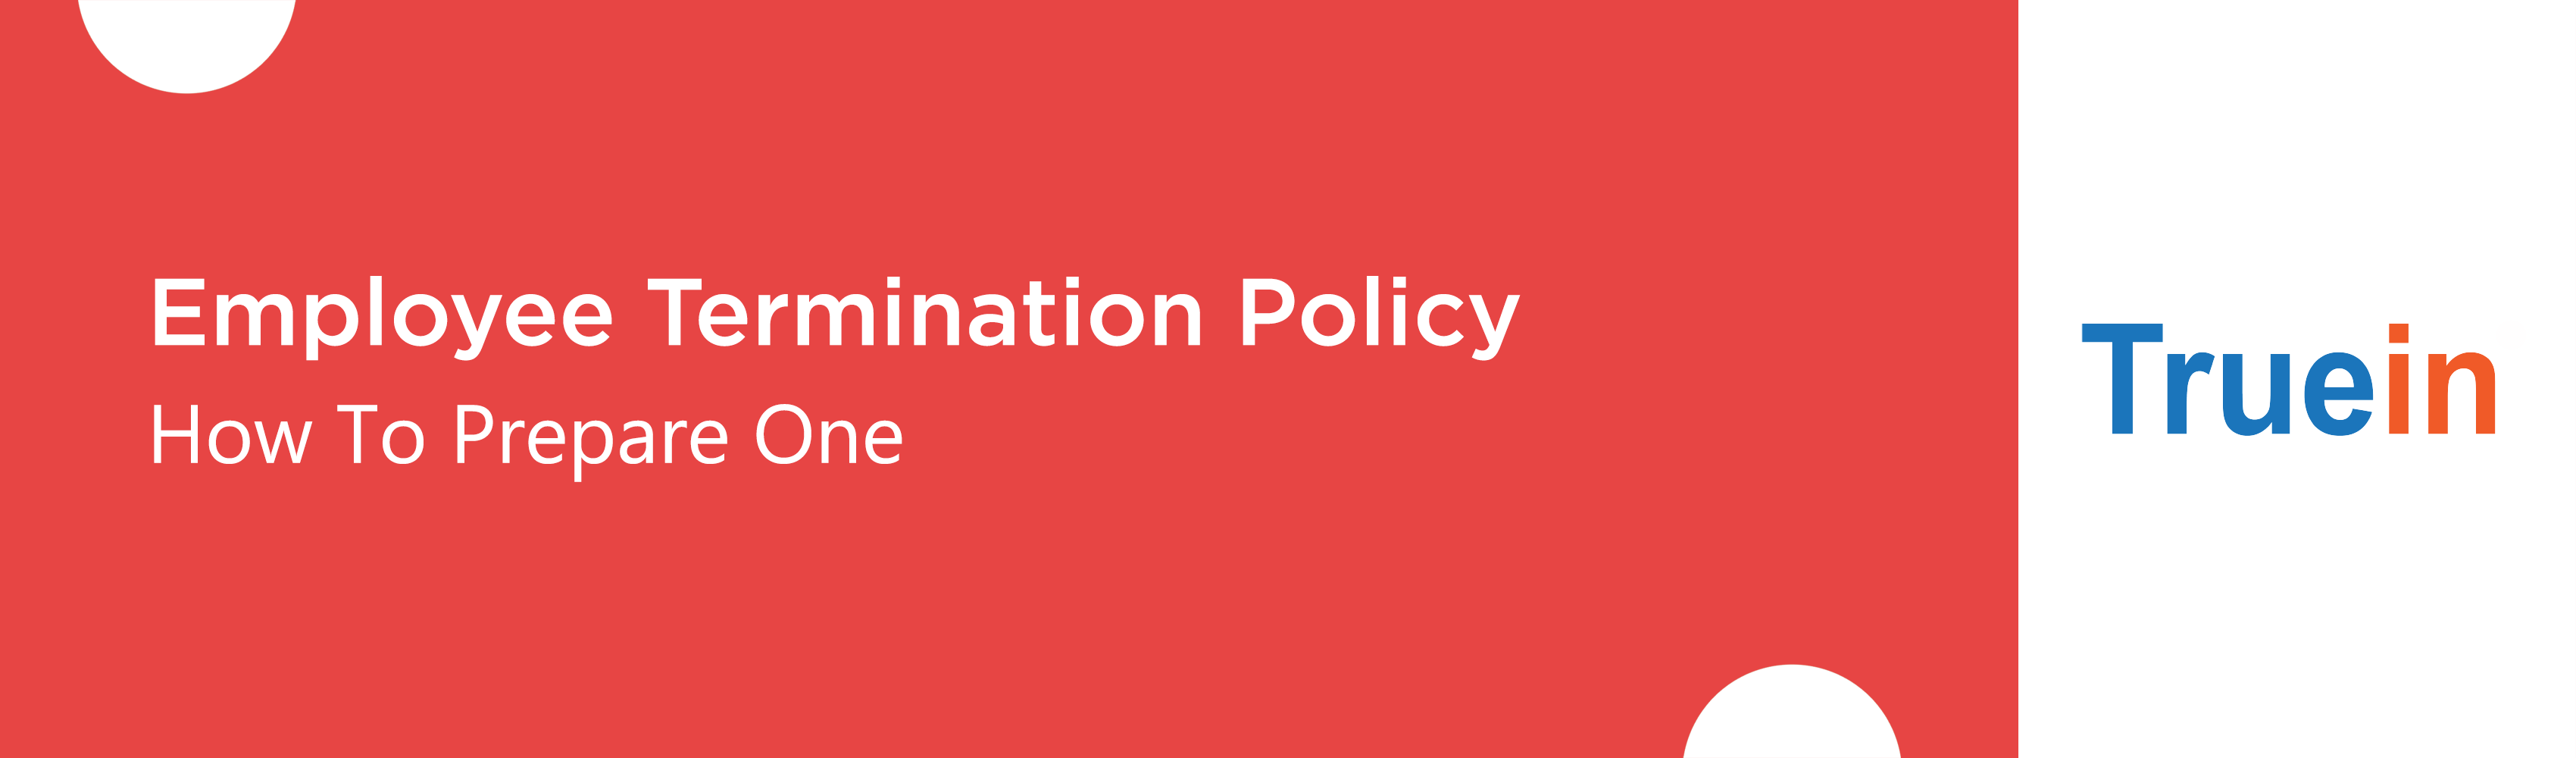 Employee Termination Policy - How To Prepare One